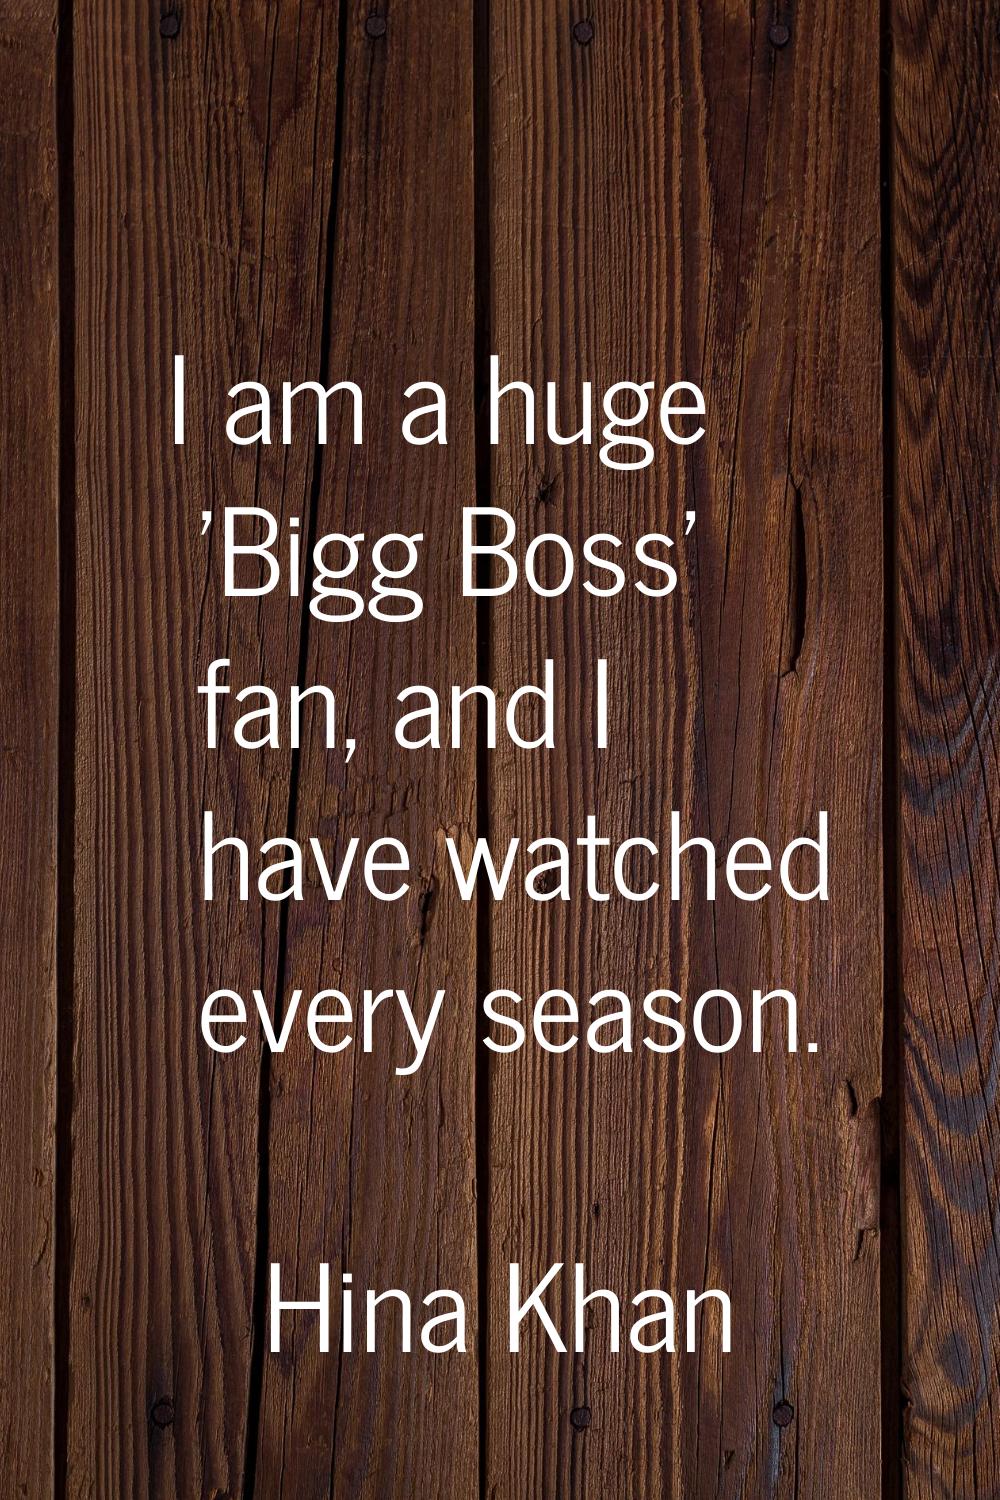 I am a huge 'Bigg Boss' fan, and I have watched every season.